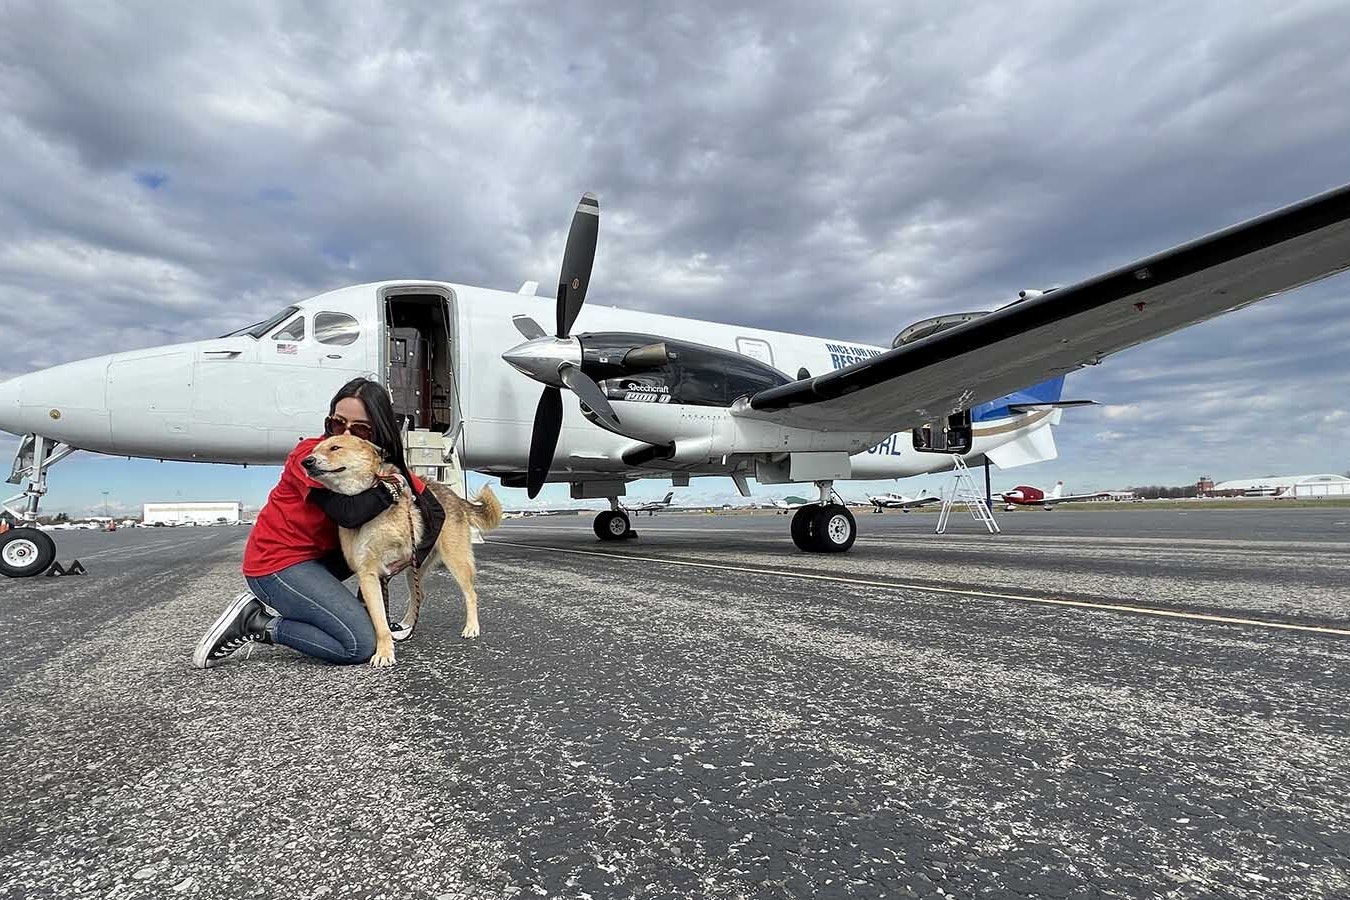 Volunteers from animal rescues all over the country worked with the Society for the Prevention of Cruelty of Animals (SPCA) International to find homes for the 70 rescued dogs.